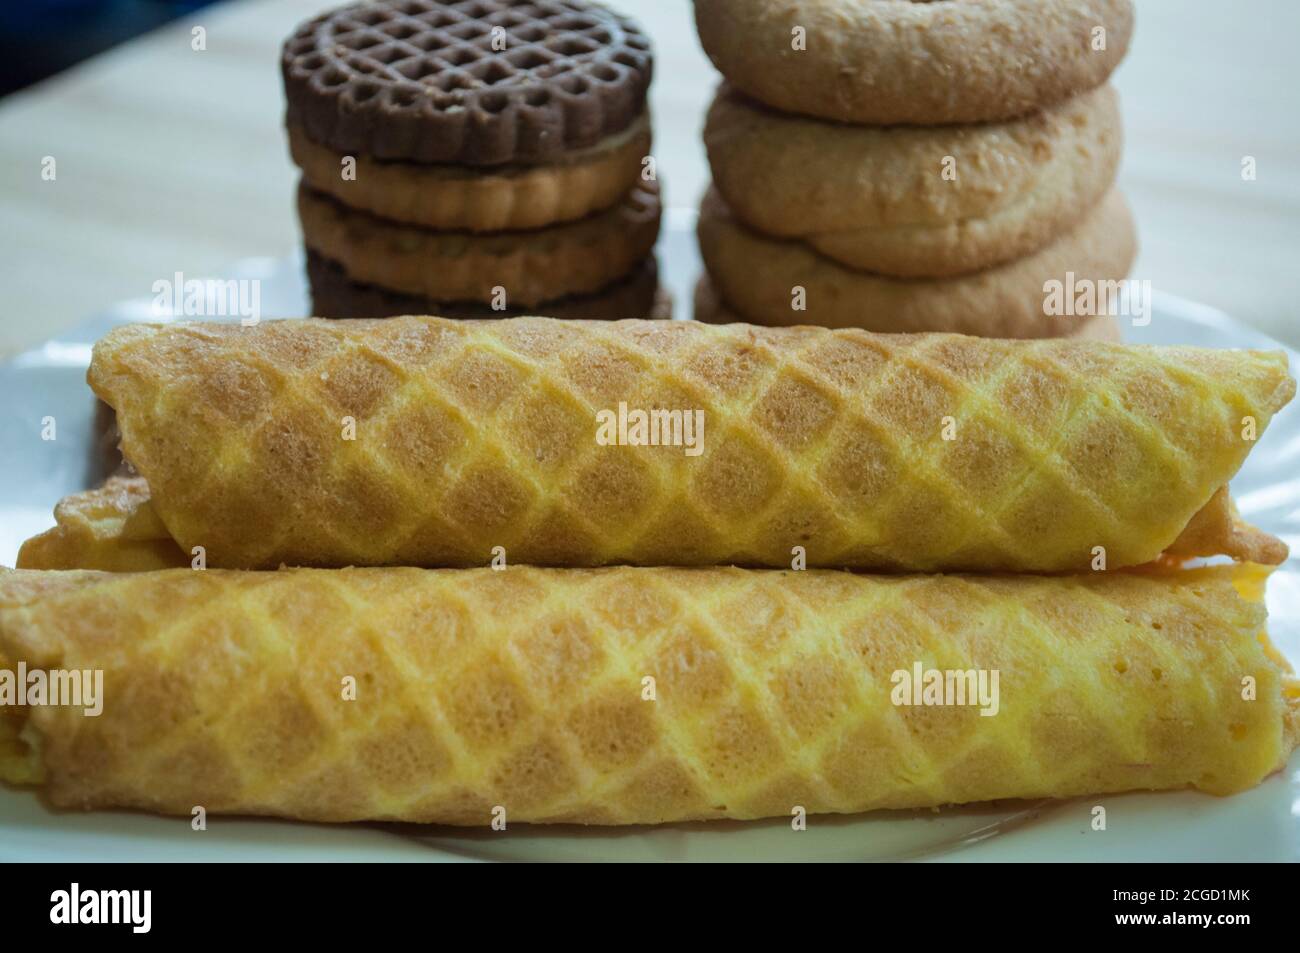 Waffle rolls and cookies on a white plate for tea, breakfast. Waffles in front. Composition on a wooden background. Visible waffle texture Stock Photo